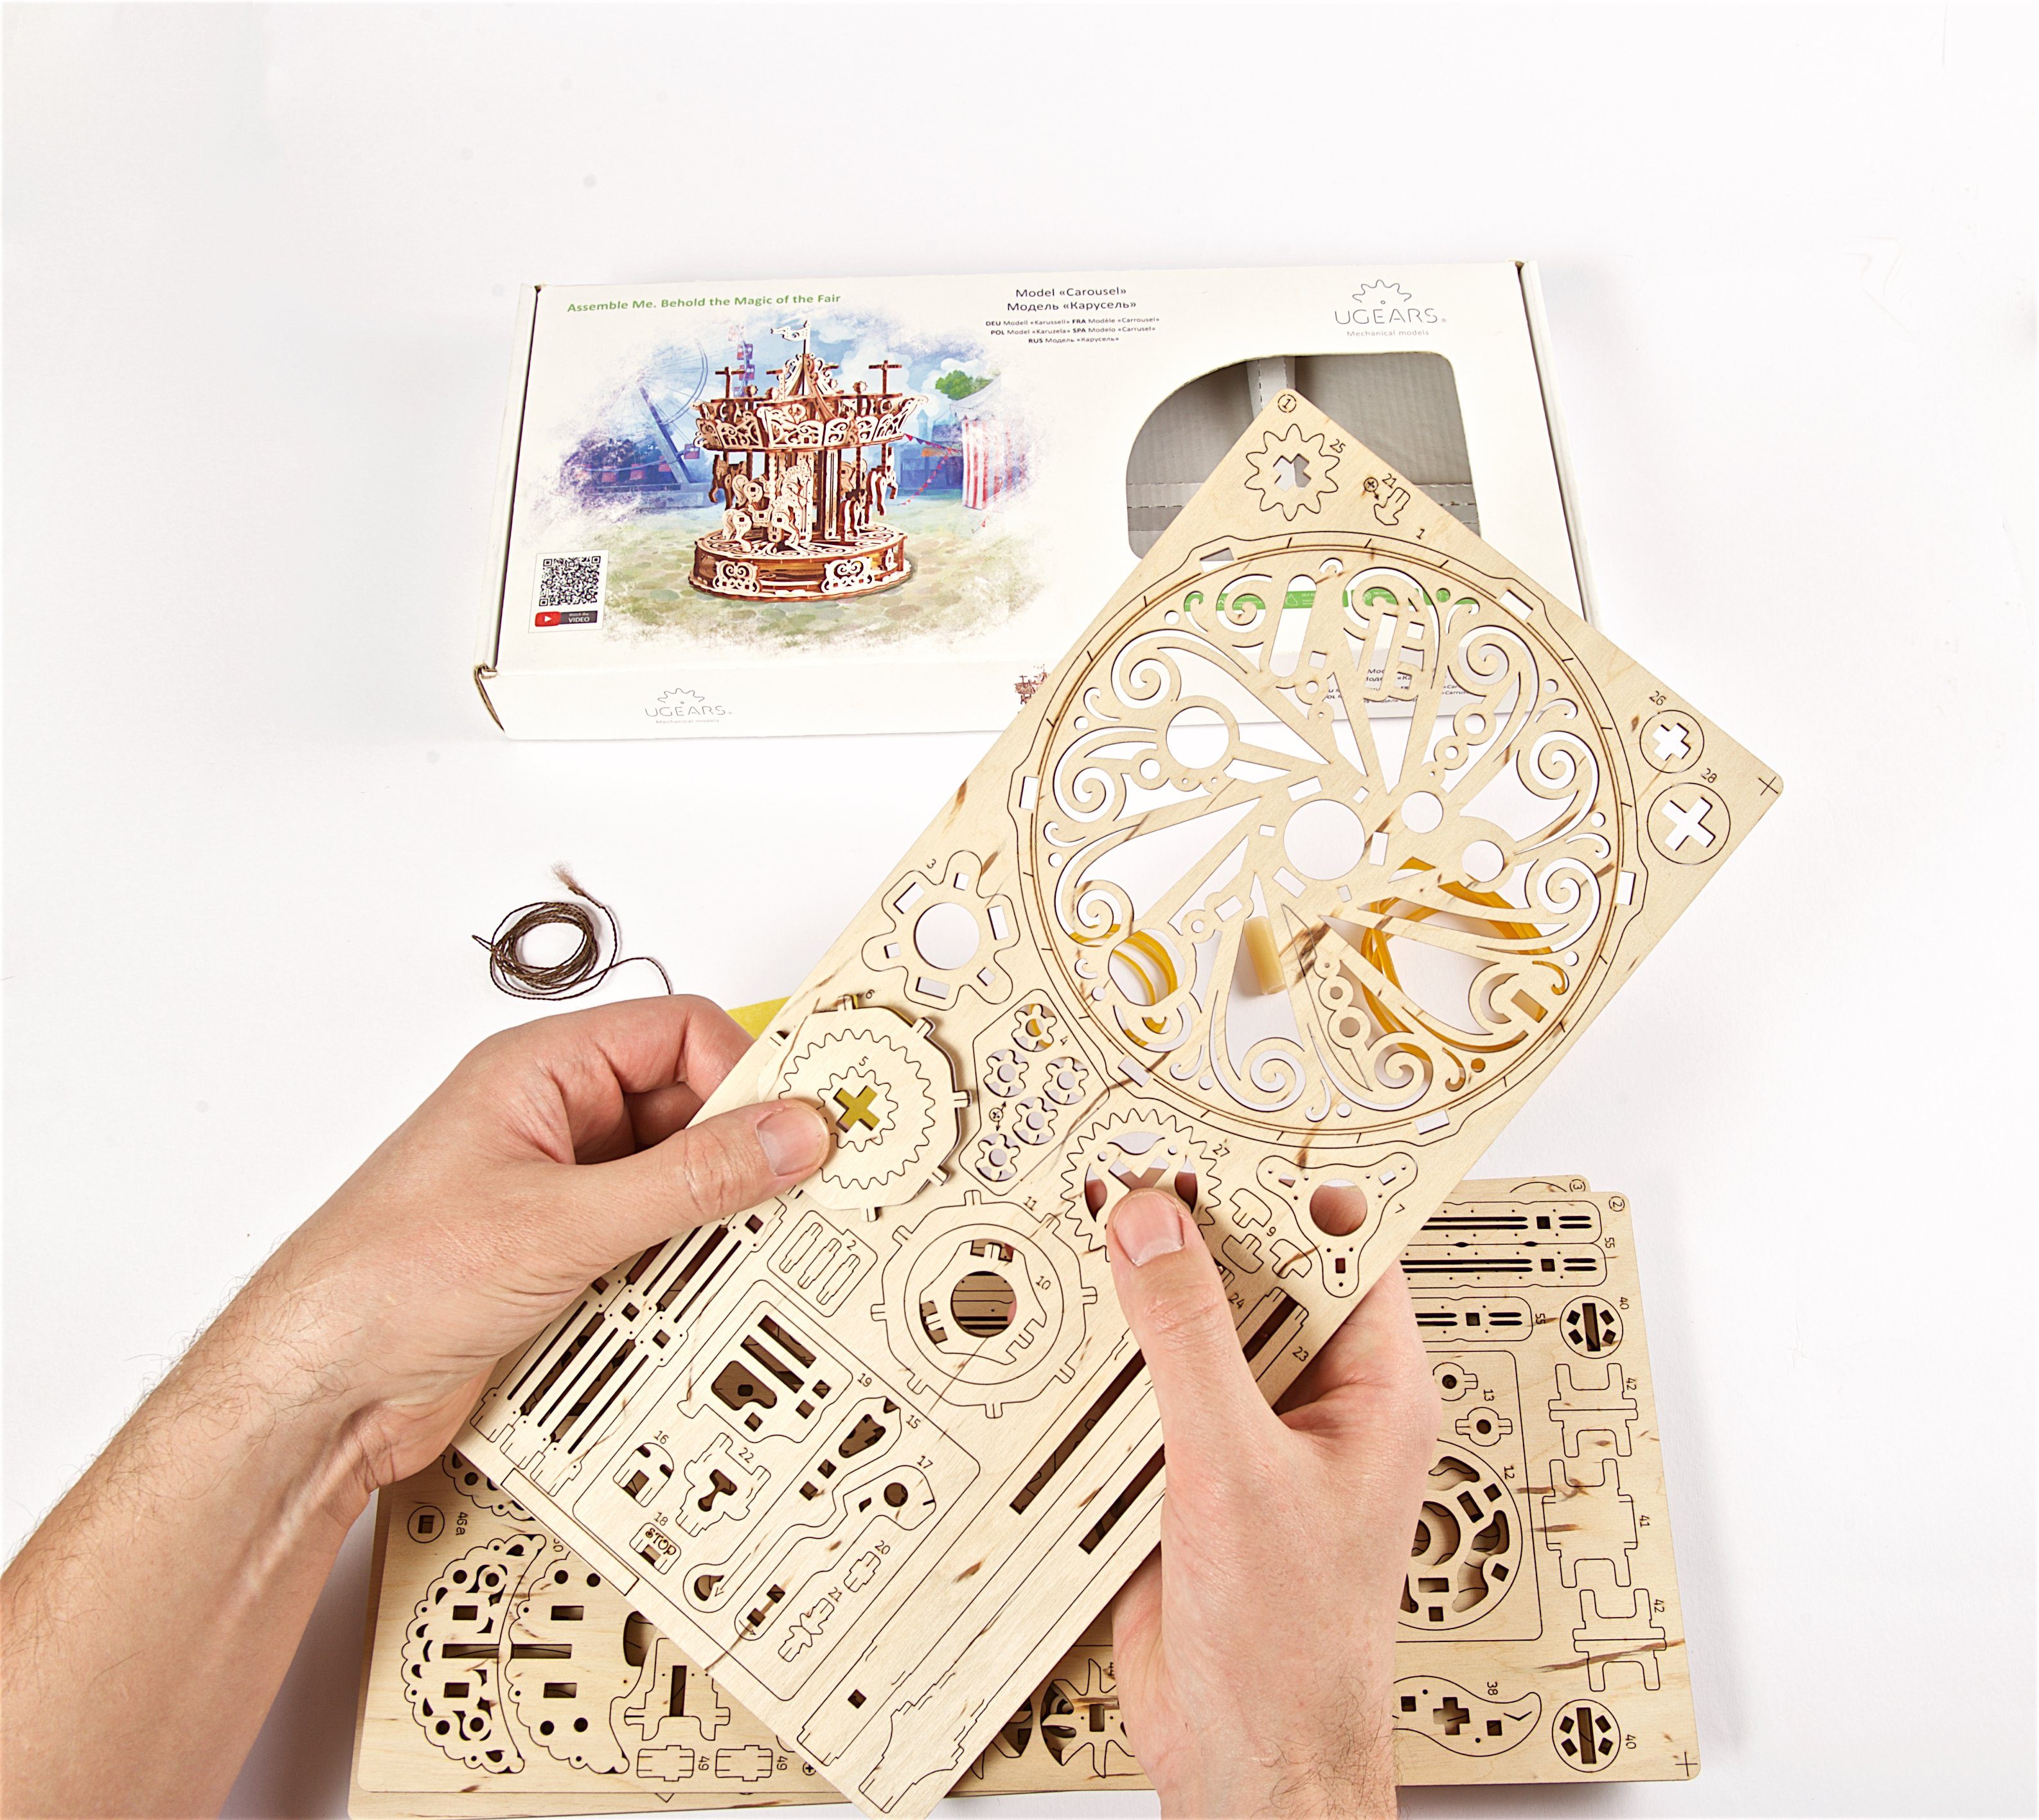 UGEARS 3D-Puzzle Modellbausatz Puzzleteile Holz KARUSSELL, 3D-Puzzle 305 UGEARS